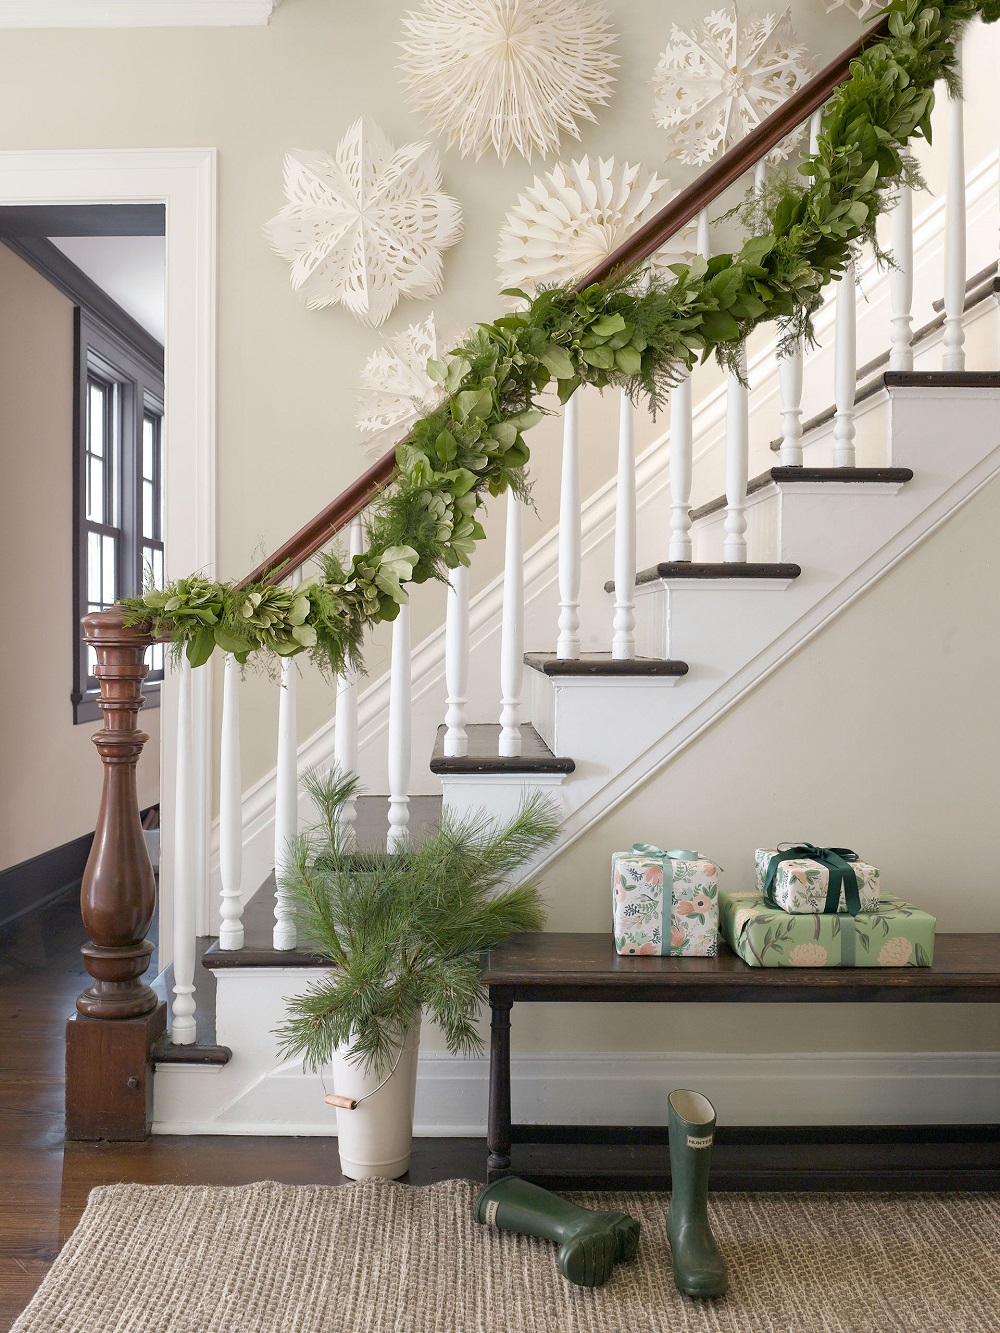 t3-133 Awesome Christmas staircase decorating ideas you should absolutely try